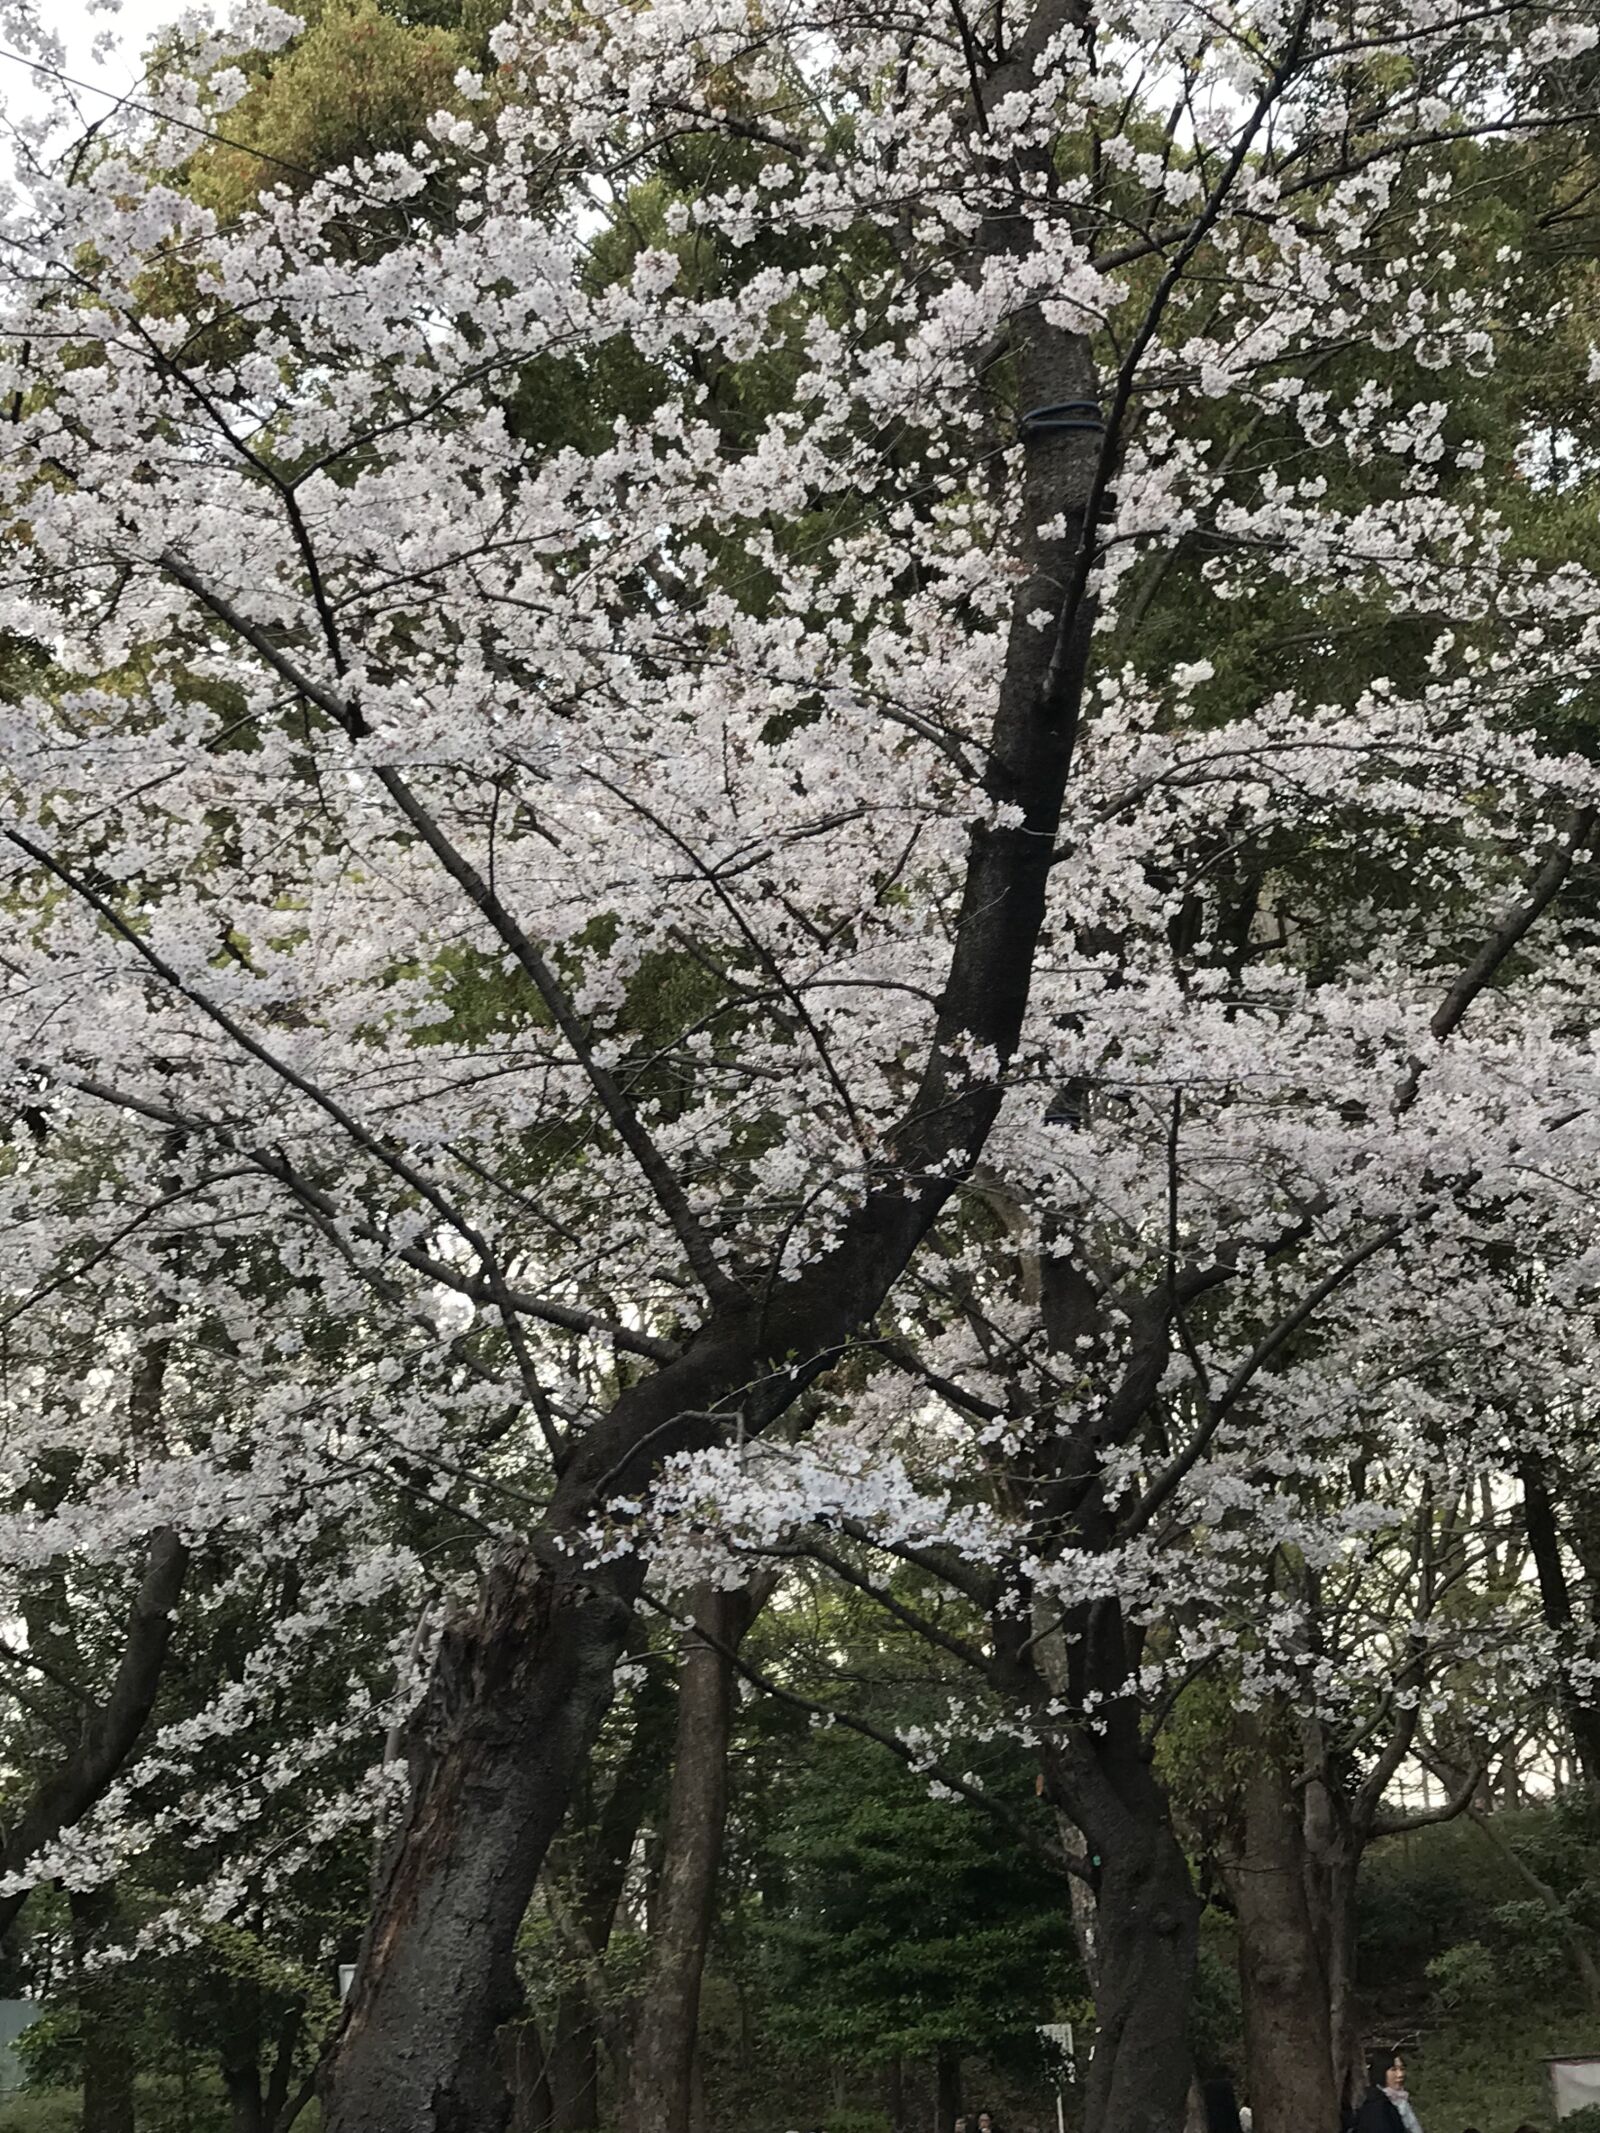 iPhone 7 Plus back dual camera 3.99mm f/1.8 sample photo. Cherry, blossom, japanese photography